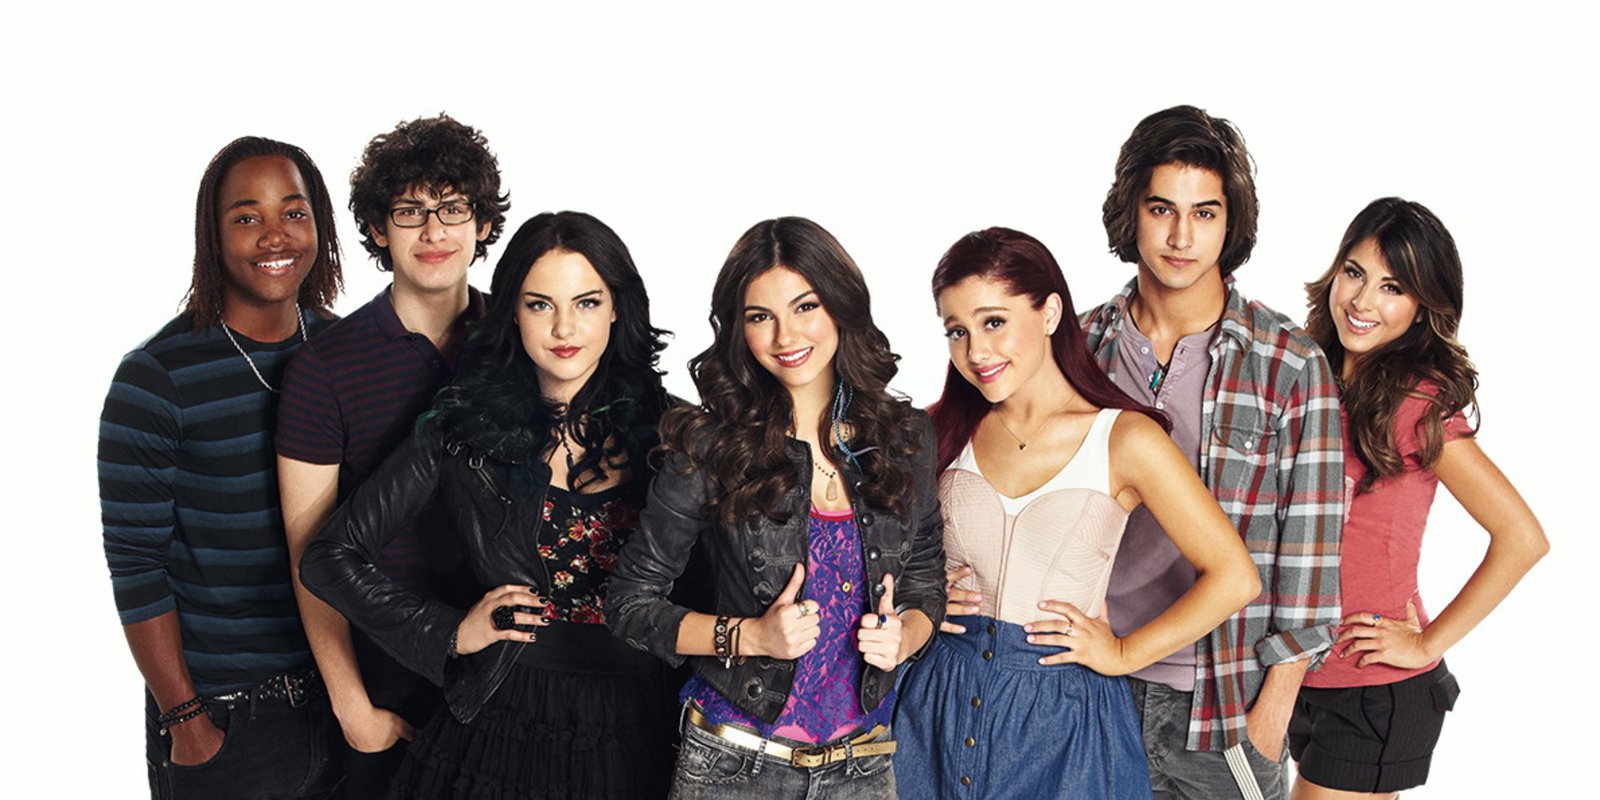 Victorious - Staffel 3